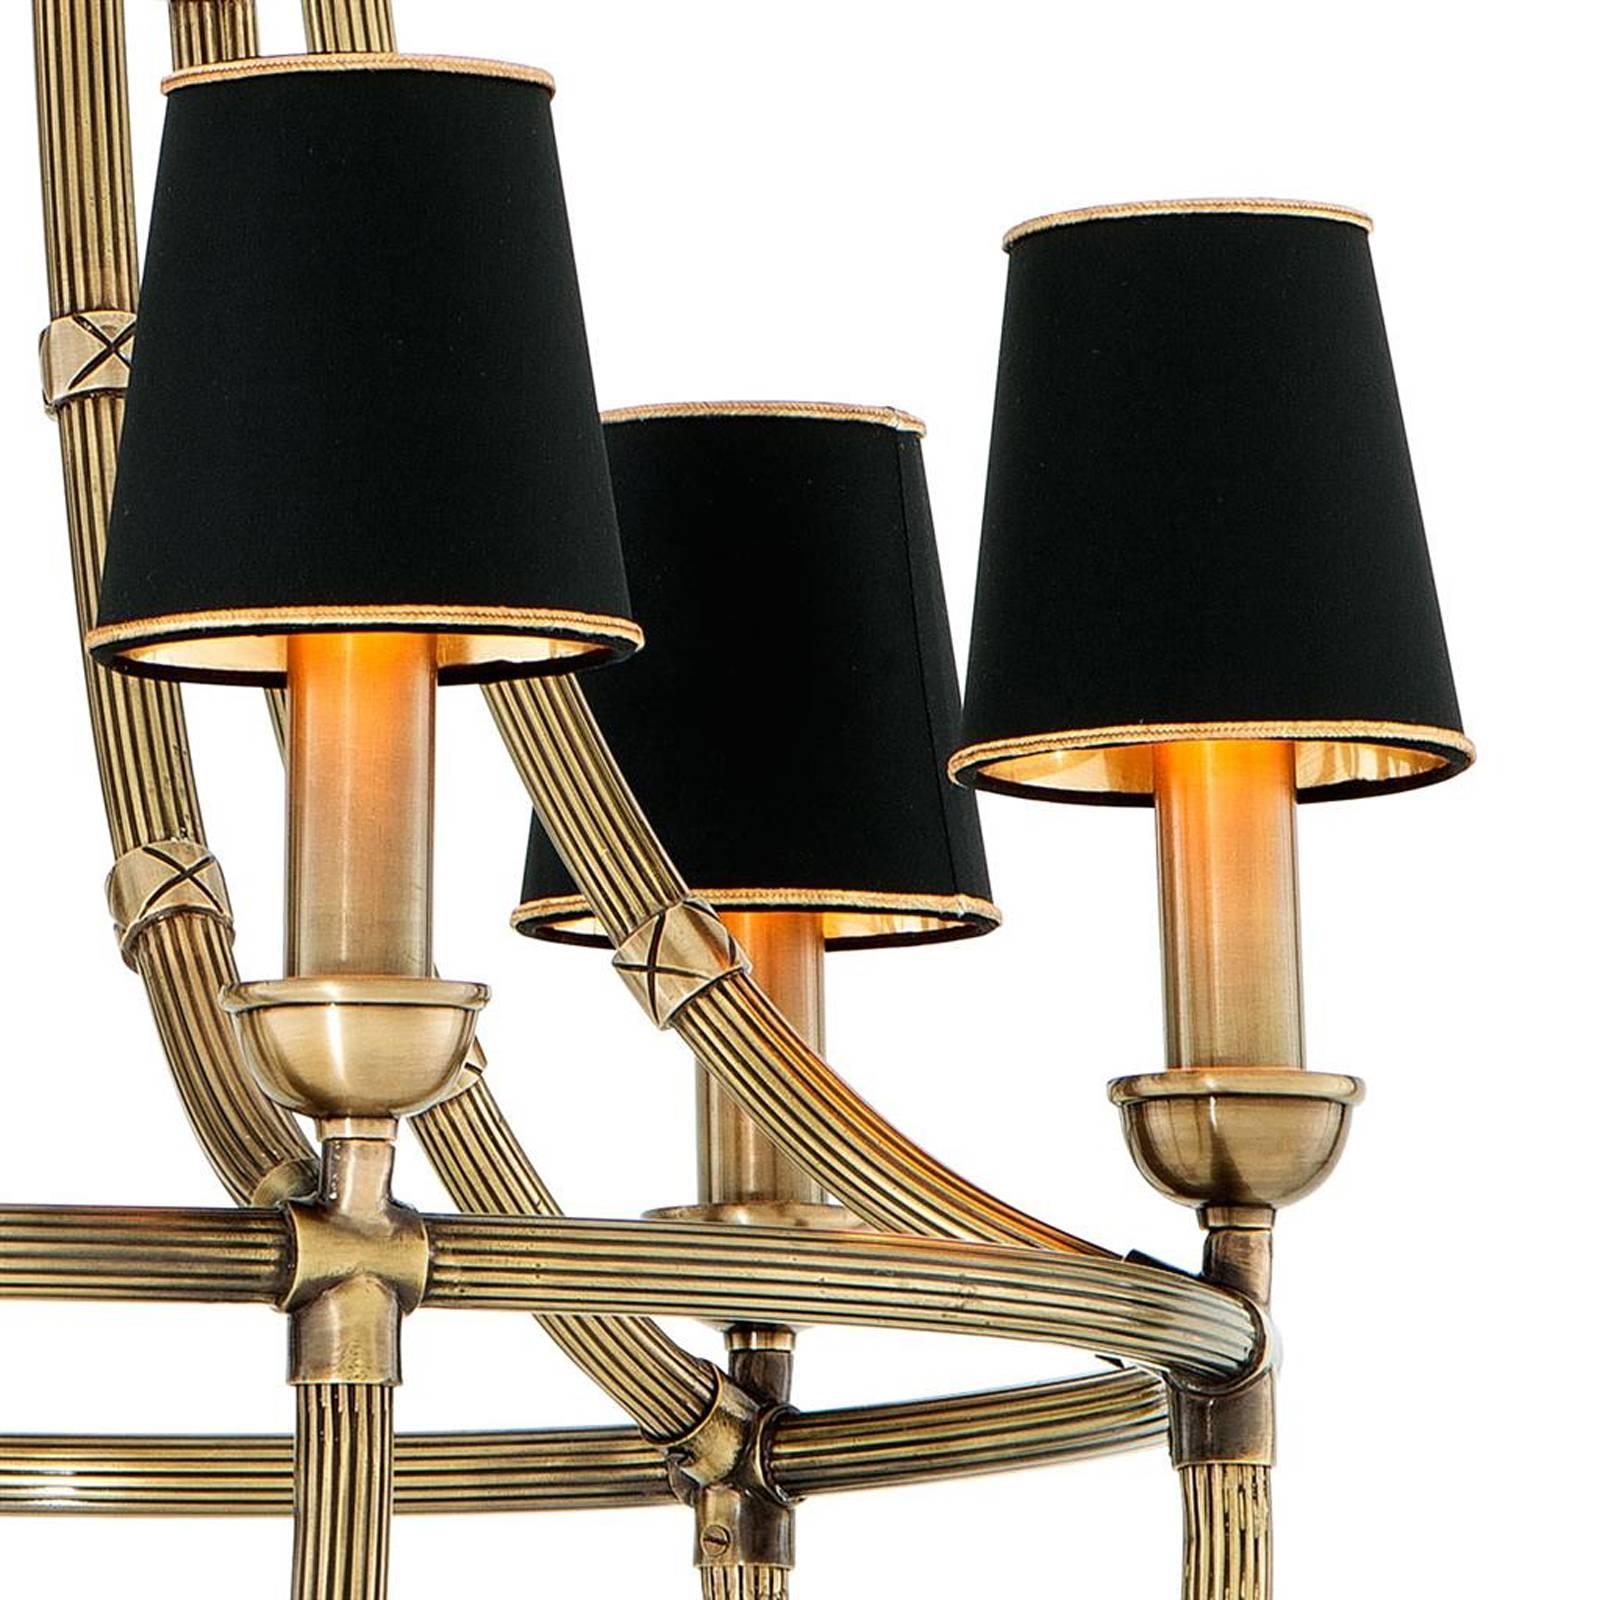 Chandelier Sherlock L with antique brass finish structure
with six bulbs lamp holder type E14, max 40 watt including 
Six black shades with gold trim. Bulbs not included.
Also available in antique silver plated finish or gunmetal 
bronze